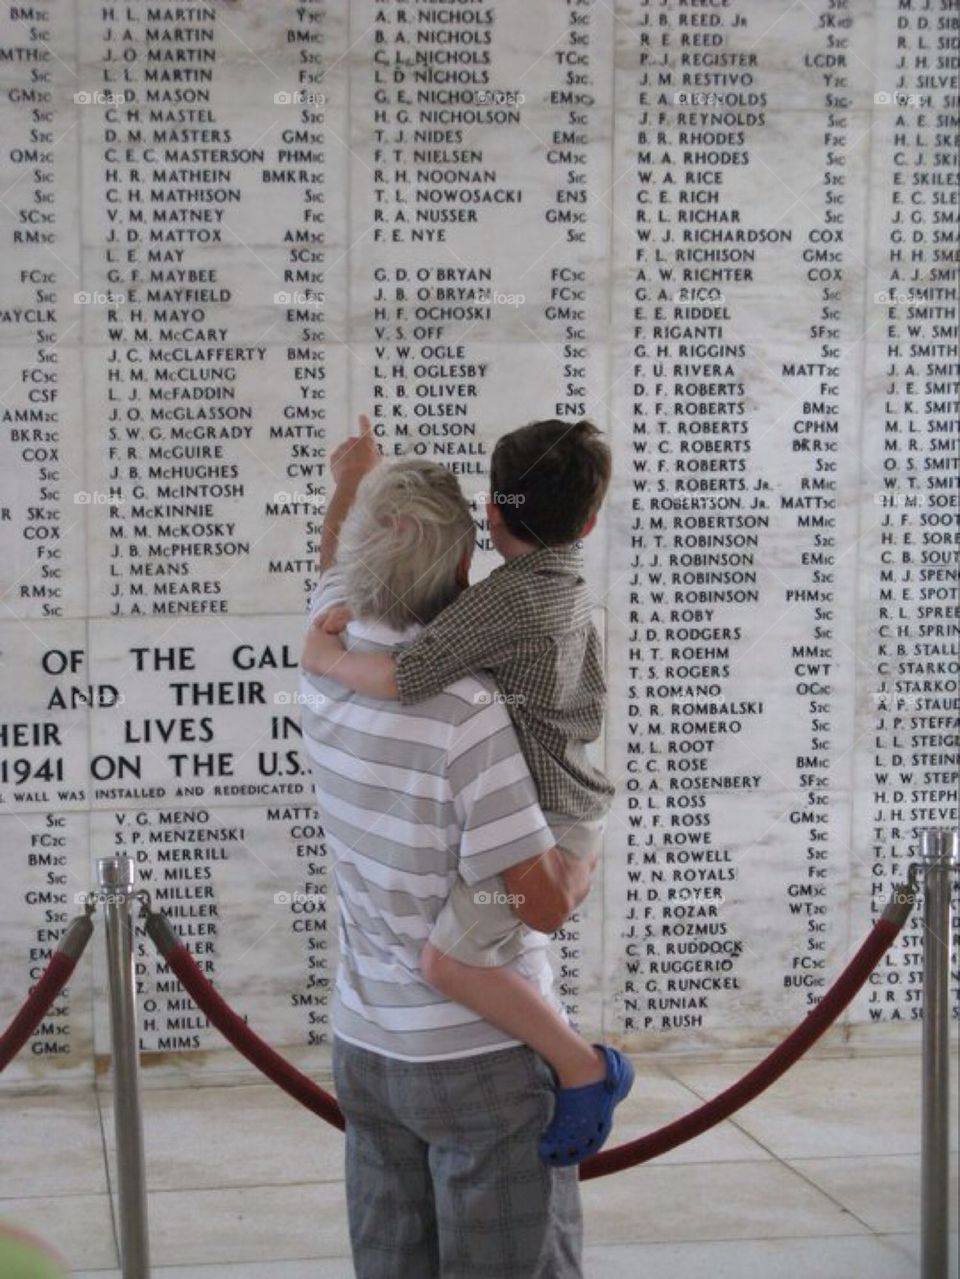 Reading the names of those who died on December 7, 1941